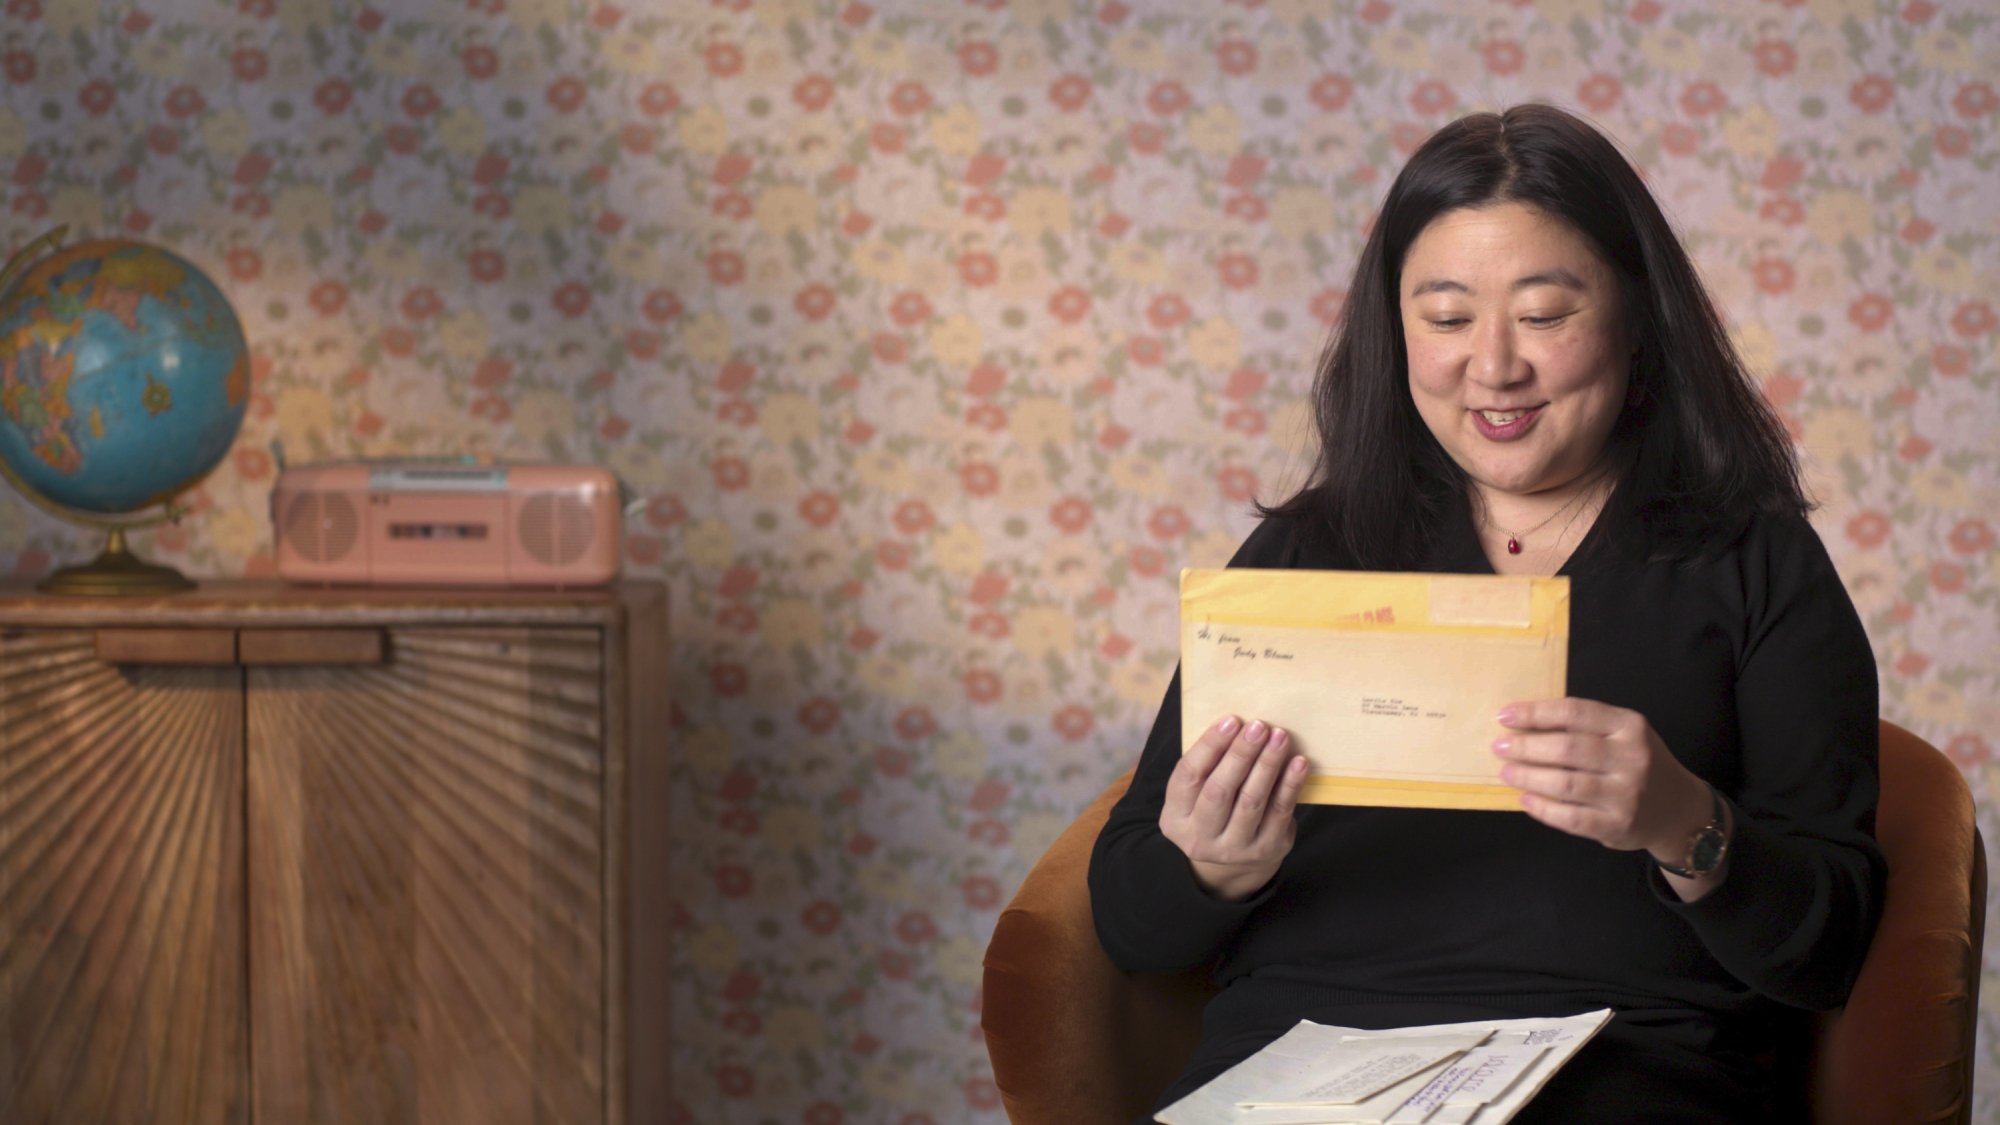 Lorrie Kim, a woman in a black blouse, holds up an envelope.